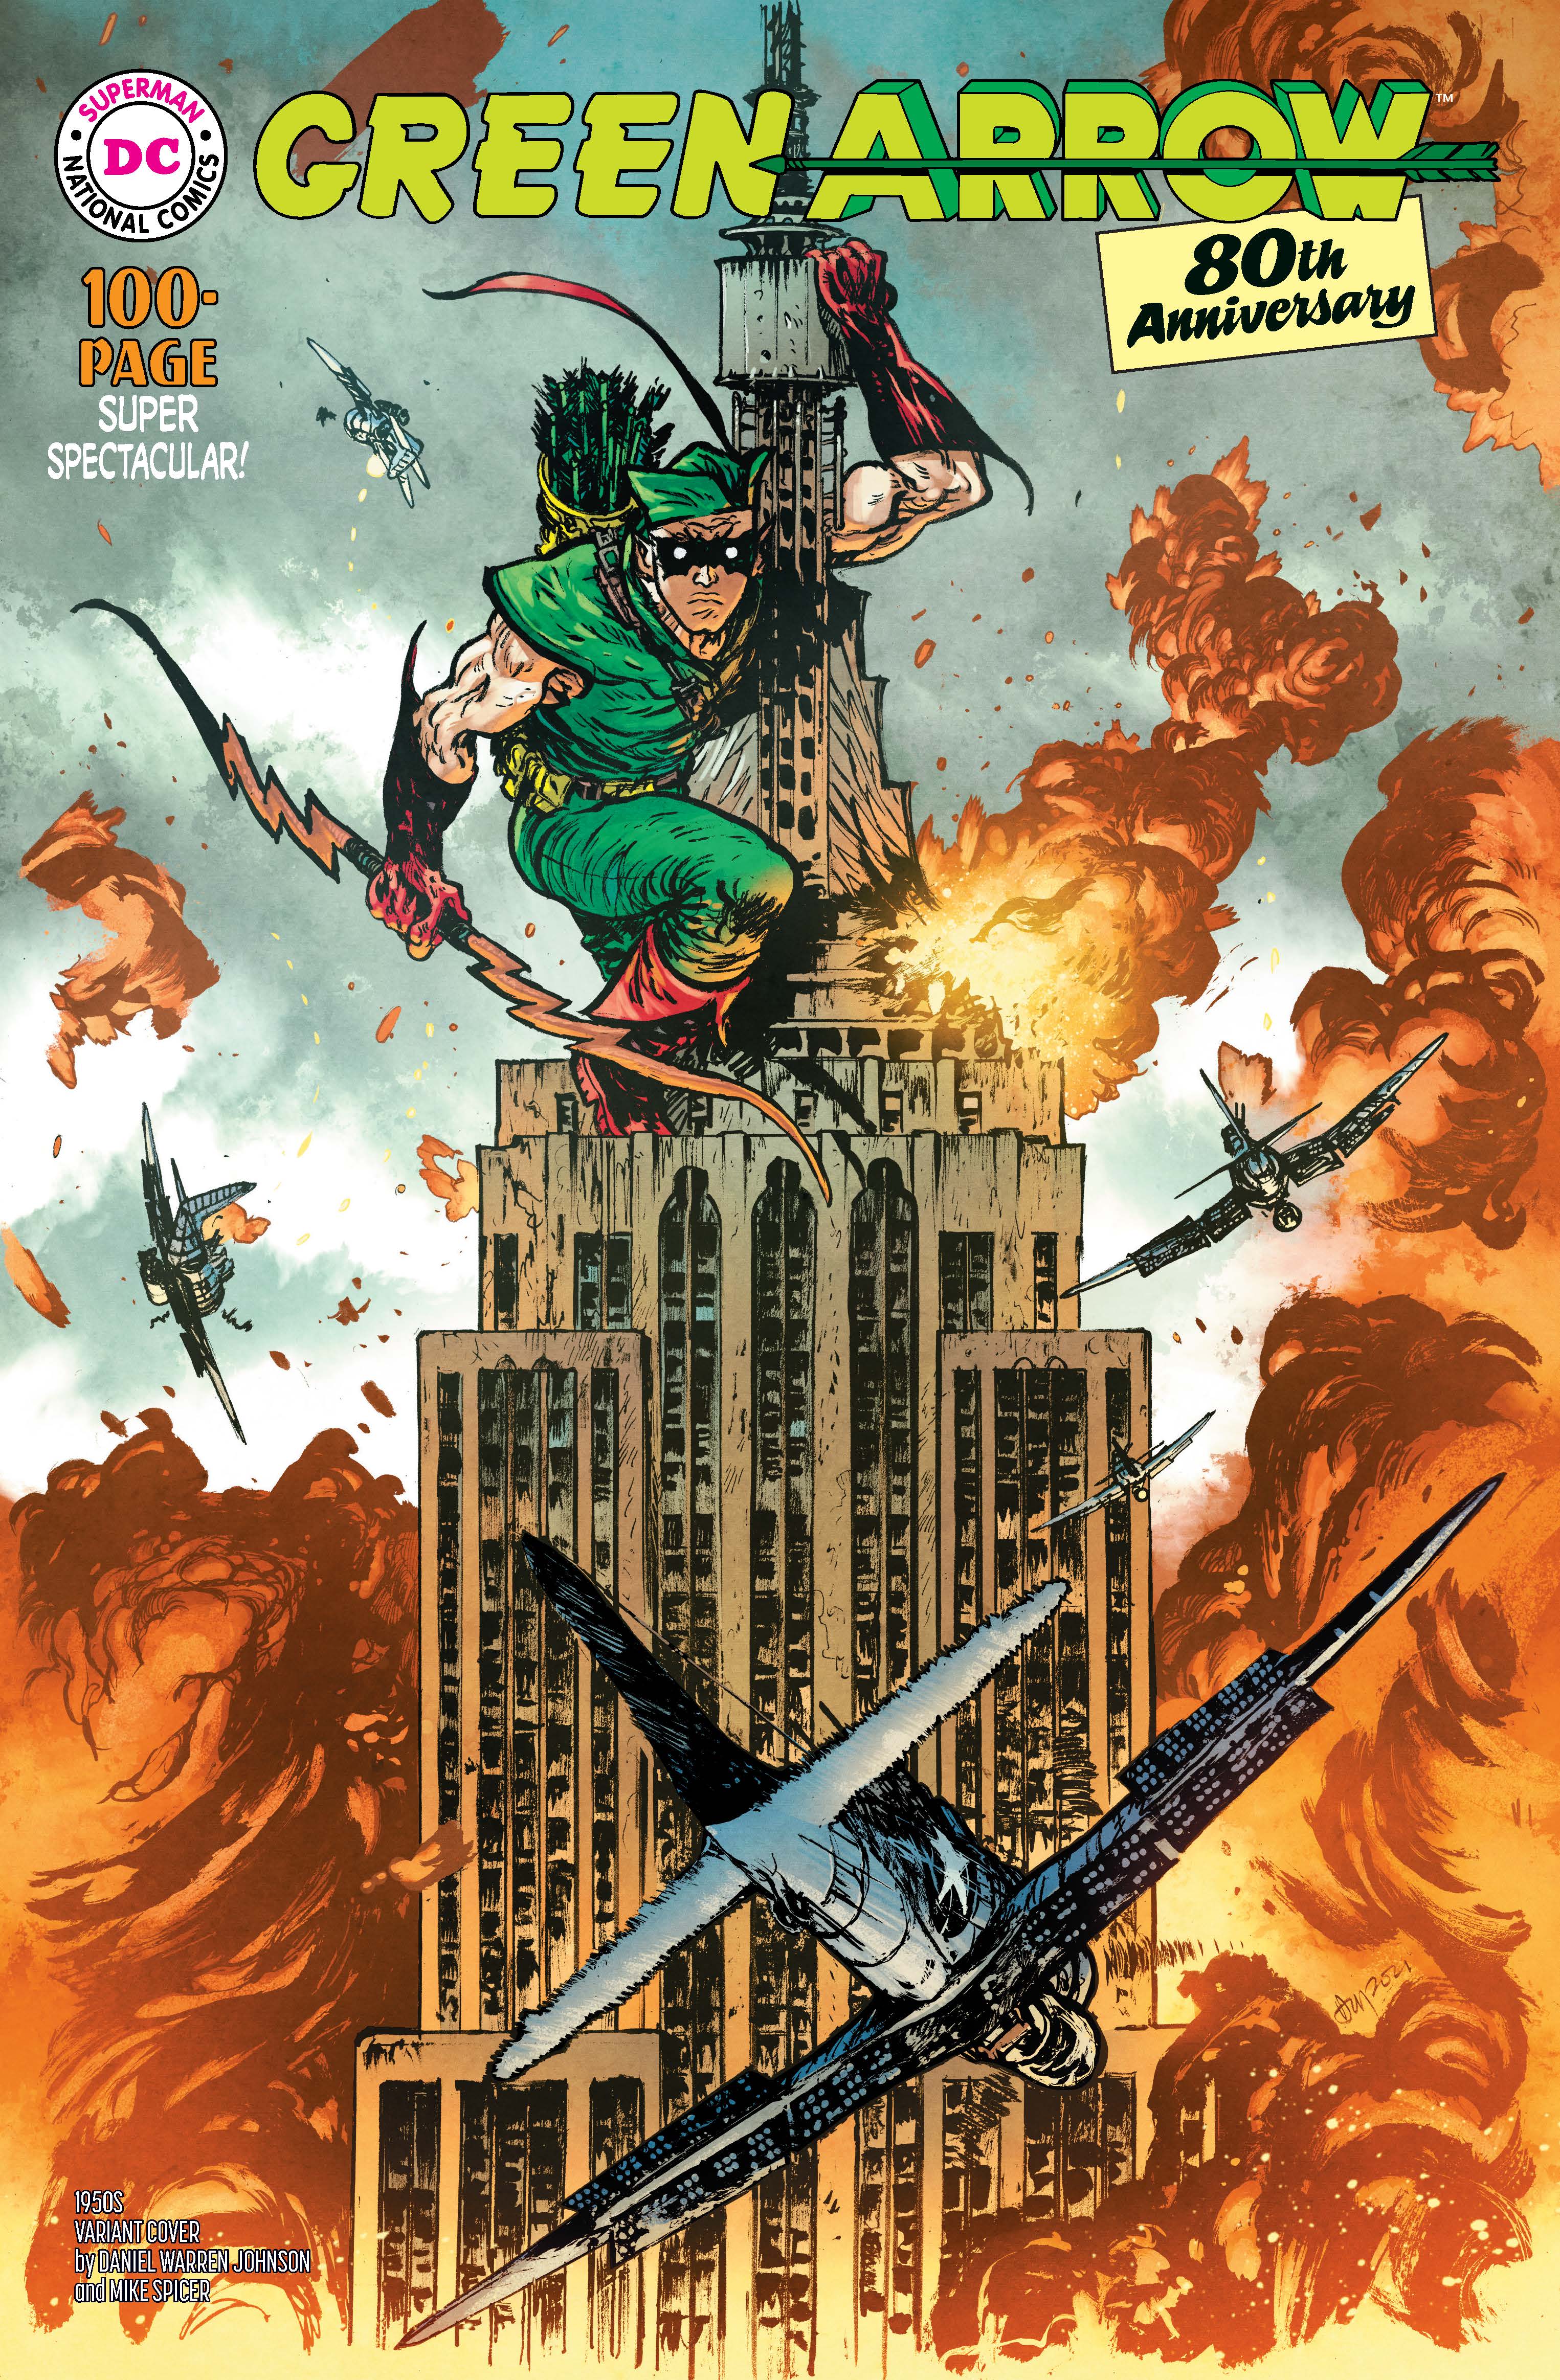 Green Arrow 80th Anniversary 100-Page Super Spectacular #1 Cover D Neal  Adams 1960s Variant